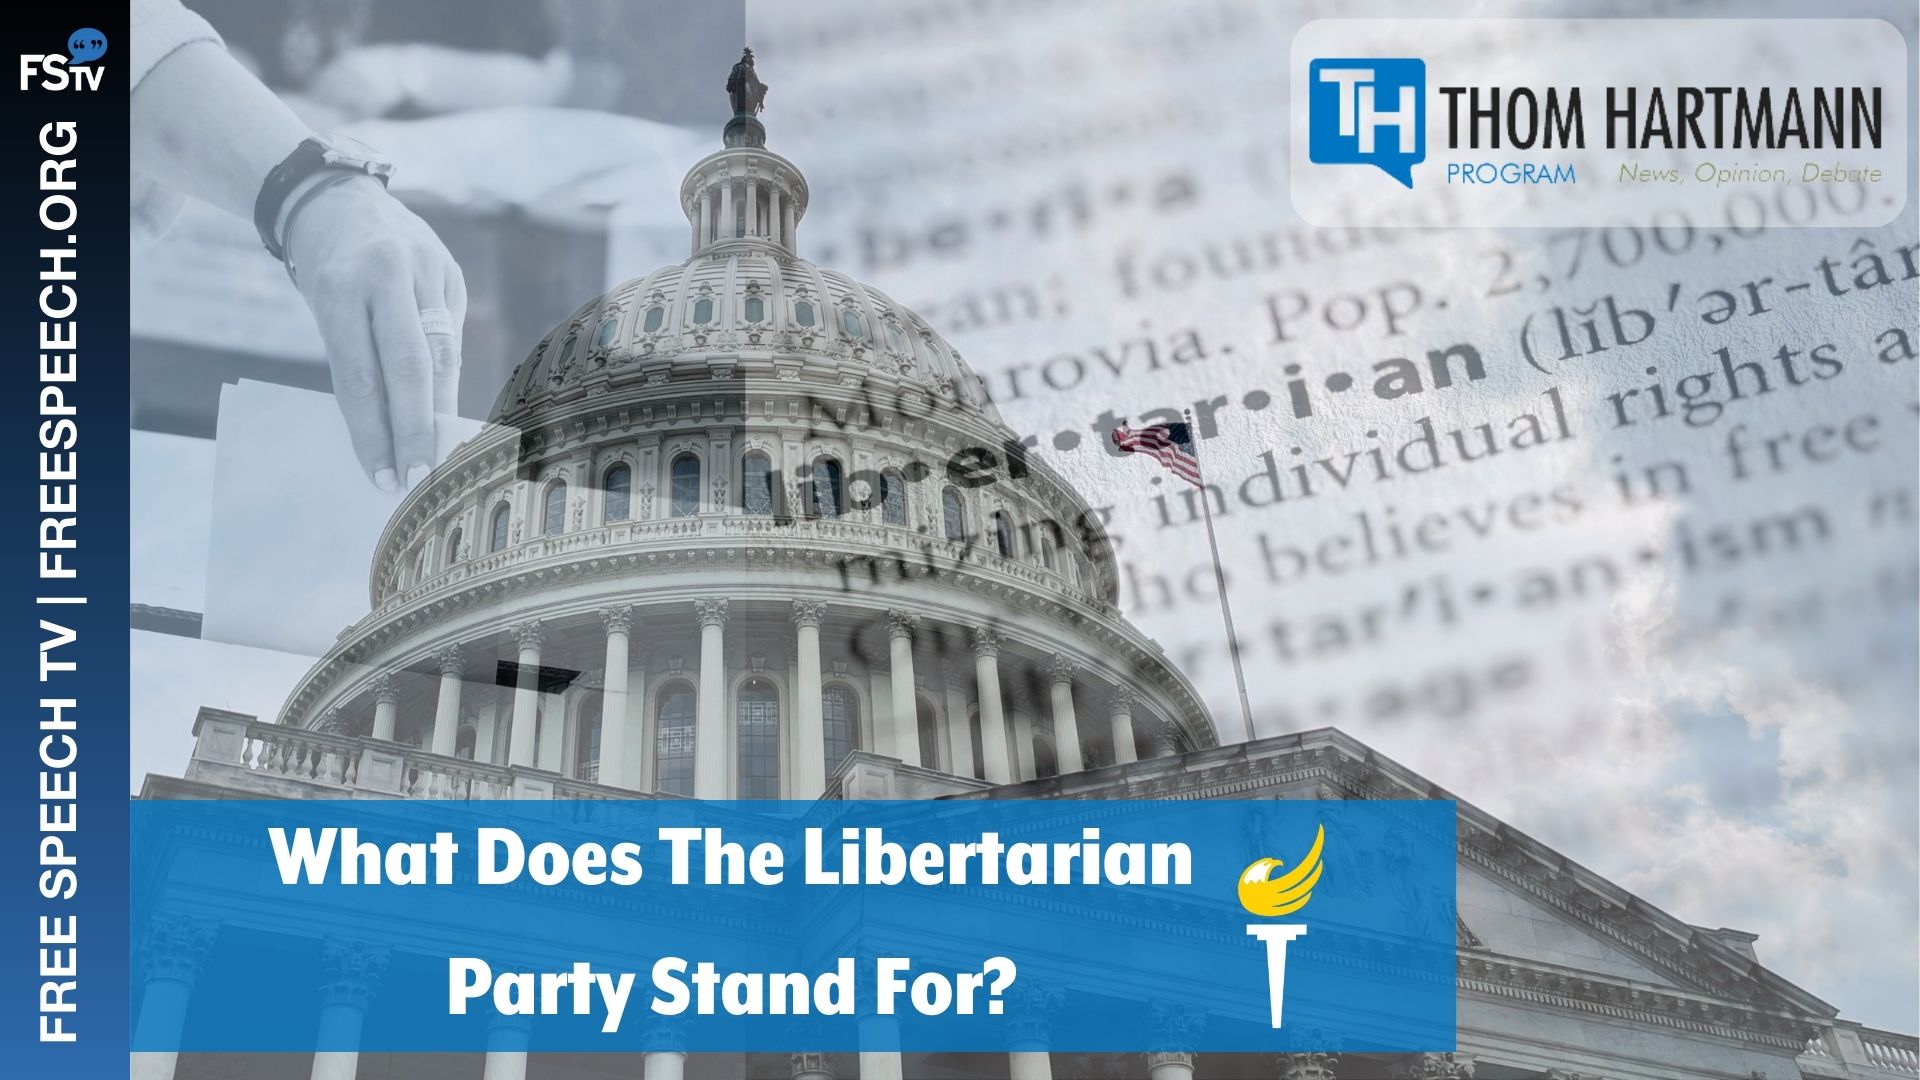 The Thom Hartmann Program | What Does The Libertarian Party Stand For?